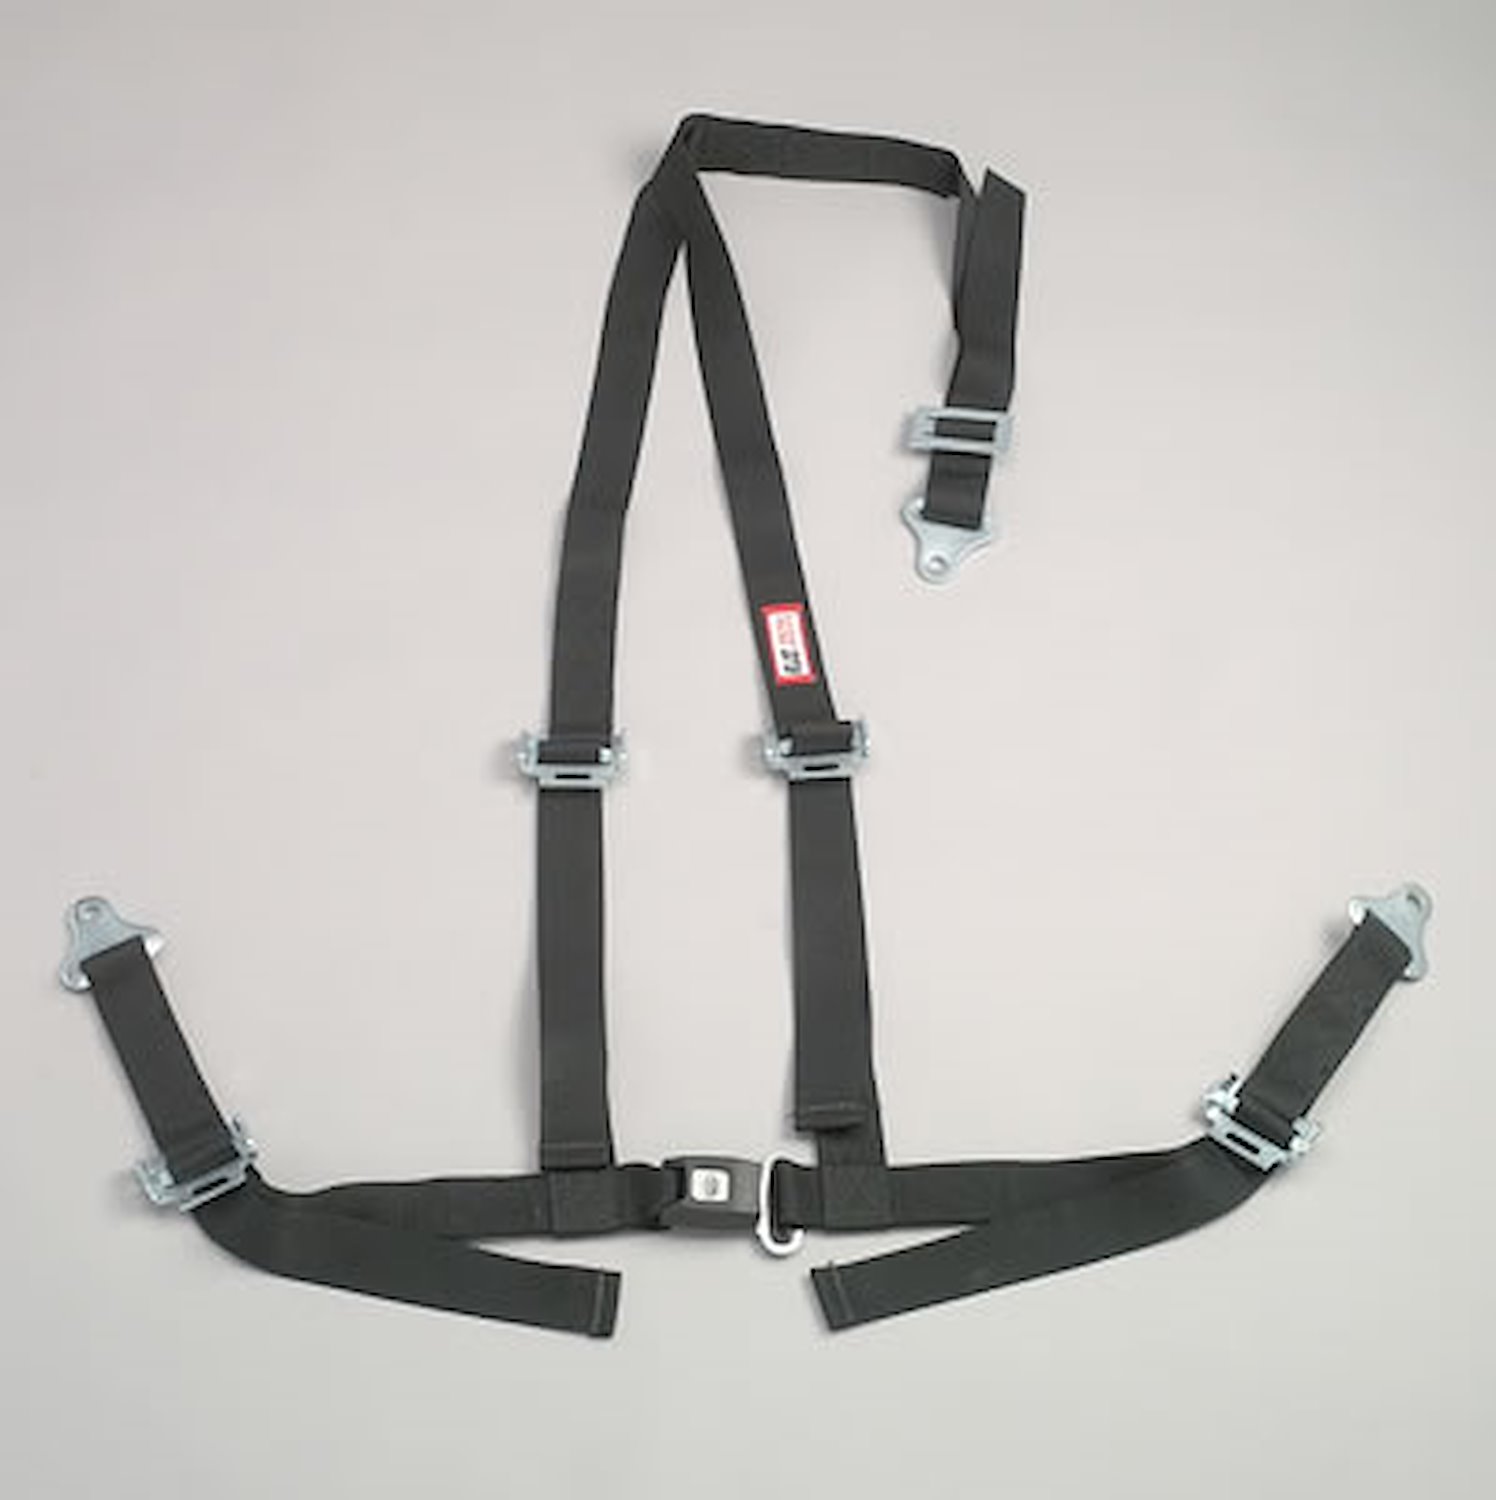 NON-SFI B&T HARNESS 2 PULL UP Lap Belt 2 S. H. Individual ROLL BAR Mount ALL WRAP ENDS BLACK